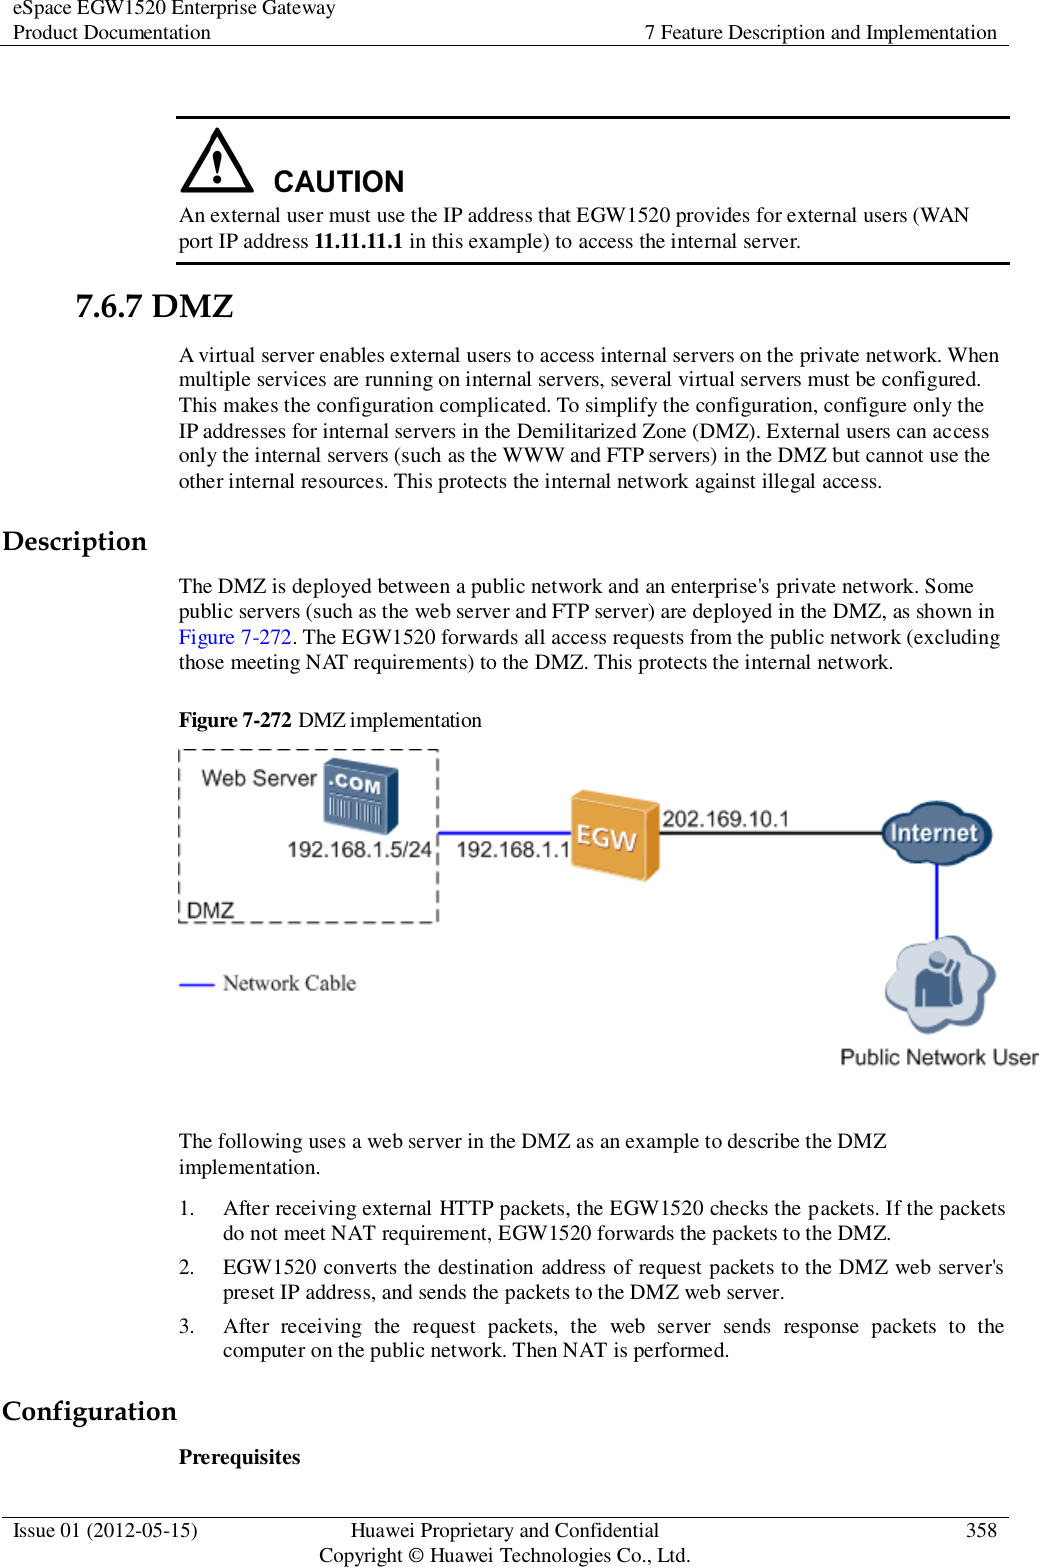 eSpace EGW1520 Enterprise Gateway Product Documentation 7 Feature Description and Implementation  Issue 01 (2012-05-15) Huawei Proprietary and Confidential                                     Copyright © Huawei Technologies Co., Ltd. 358    An external user must use the IP address that EGW1520 provides for external users (WAN port IP address 11.11.11.1 in this example) to access the internal server. 7.6.7 DMZ A virtual server enables external users to access internal servers on the private network. When multiple services are running on internal servers, several virtual servers must be configured. This makes the configuration complicated. To simplify the configuration, configure only the IP addresses for internal servers in the Demilitarized Zone (DMZ). External users can access only the internal servers (such as the WWW and FTP servers) in the DMZ but cannot use the other internal resources. This protects the internal network against illegal access. Description The DMZ is deployed between a public network and an enterprise&apos;s private network. Some public servers (such as the web server and FTP server) are deployed in the DMZ, as shown in Figure 7-272. The EGW1520 forwards all access requests from the public network (excluding those meeting NAT requirements) to the DMZ. This protects the internal network.   Figure 7-272 DMZ implementation   The following uses a web server in the DMZ as an example to describe the DMZ implementation. 1. After receiving external HTTP packets, the EGW1520 checks the packets. If the packets do not meet NAT requirement, EGW1520 forwards the packets to the DMZ. 2. EGW1520 converts the destination address of request packets to the DMZ web server&apos;s preset IP address, and sends the packets to the DMZ web server. 3. After  receiving  the  request  packets,  the  web  server  sends  response  packets  to  the computer on the public network. Then NAT is performed. Configuration Prerequisites 